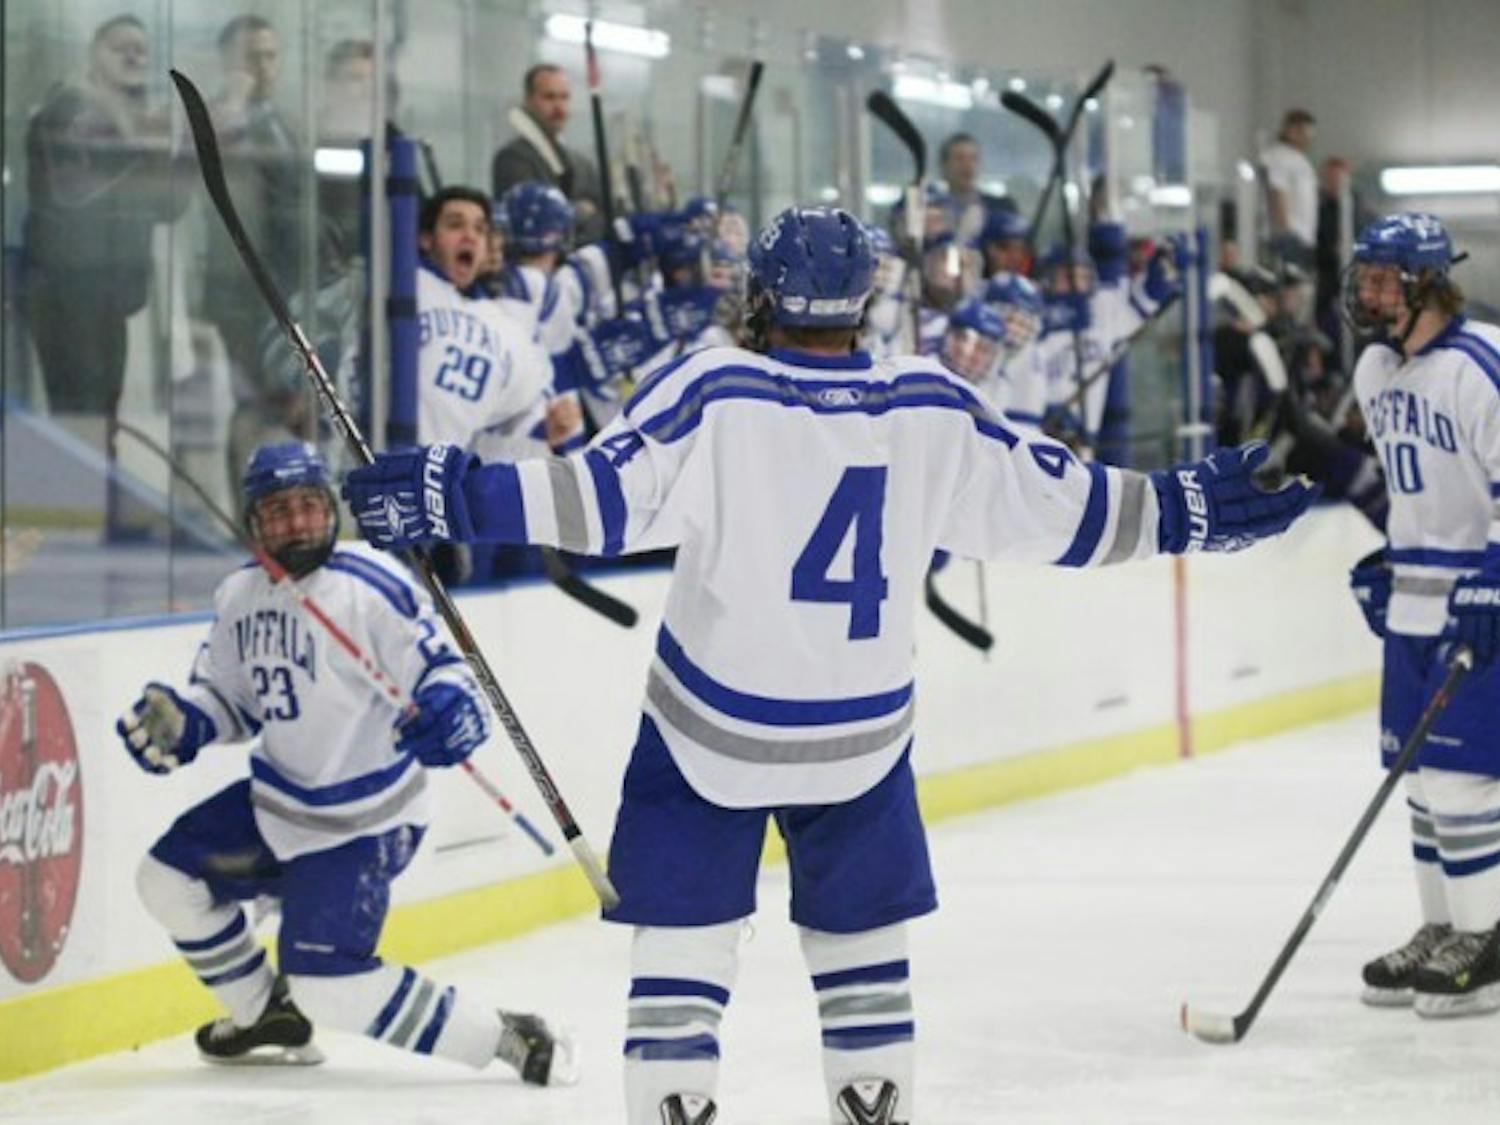 Seniors Michael Schalberg, Chris Marsack and Bryan Bergstol celebrate a goal in Buffalo&rsquo;s playoff loss to Niagara last year. No. 14 Buffalo is 10-2 this season despite a slew of injuries and faces No. 23 Niagara Friday.&nbsp;Chad Cooper, The Spectrum